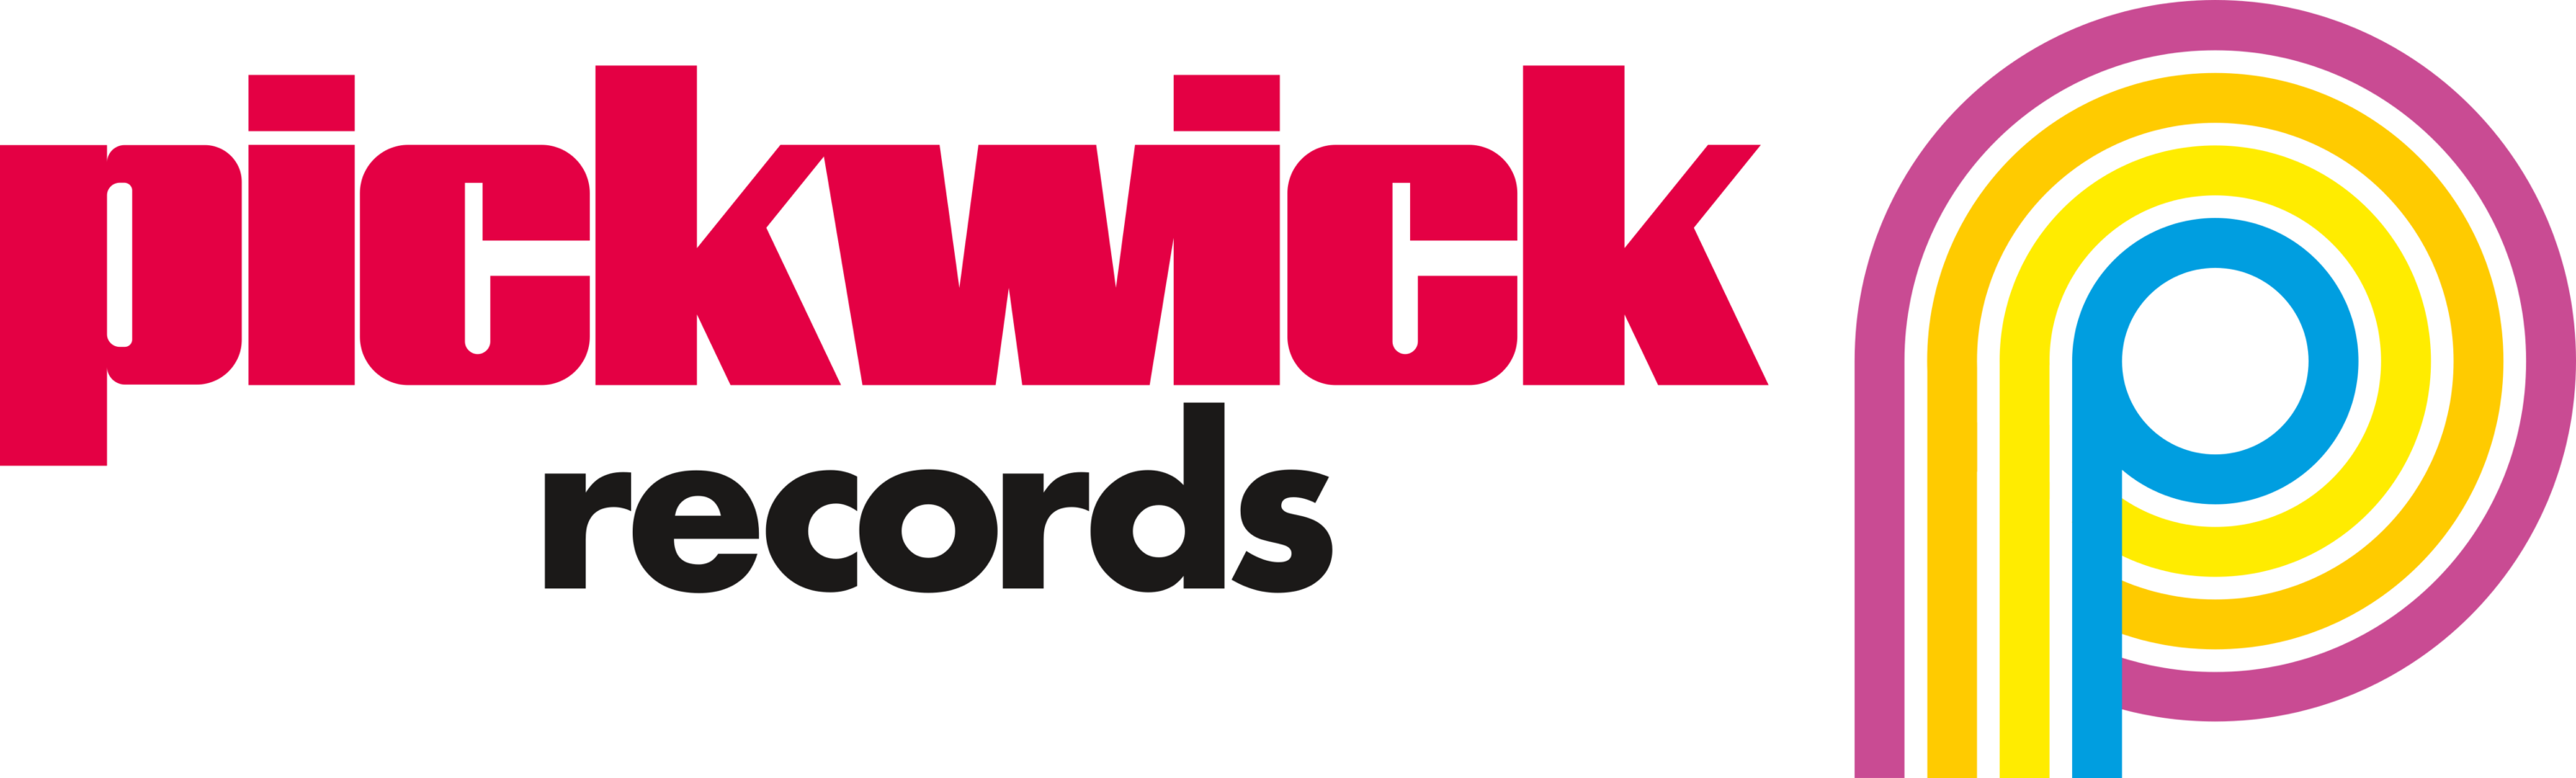 Pickwick Records Logo old